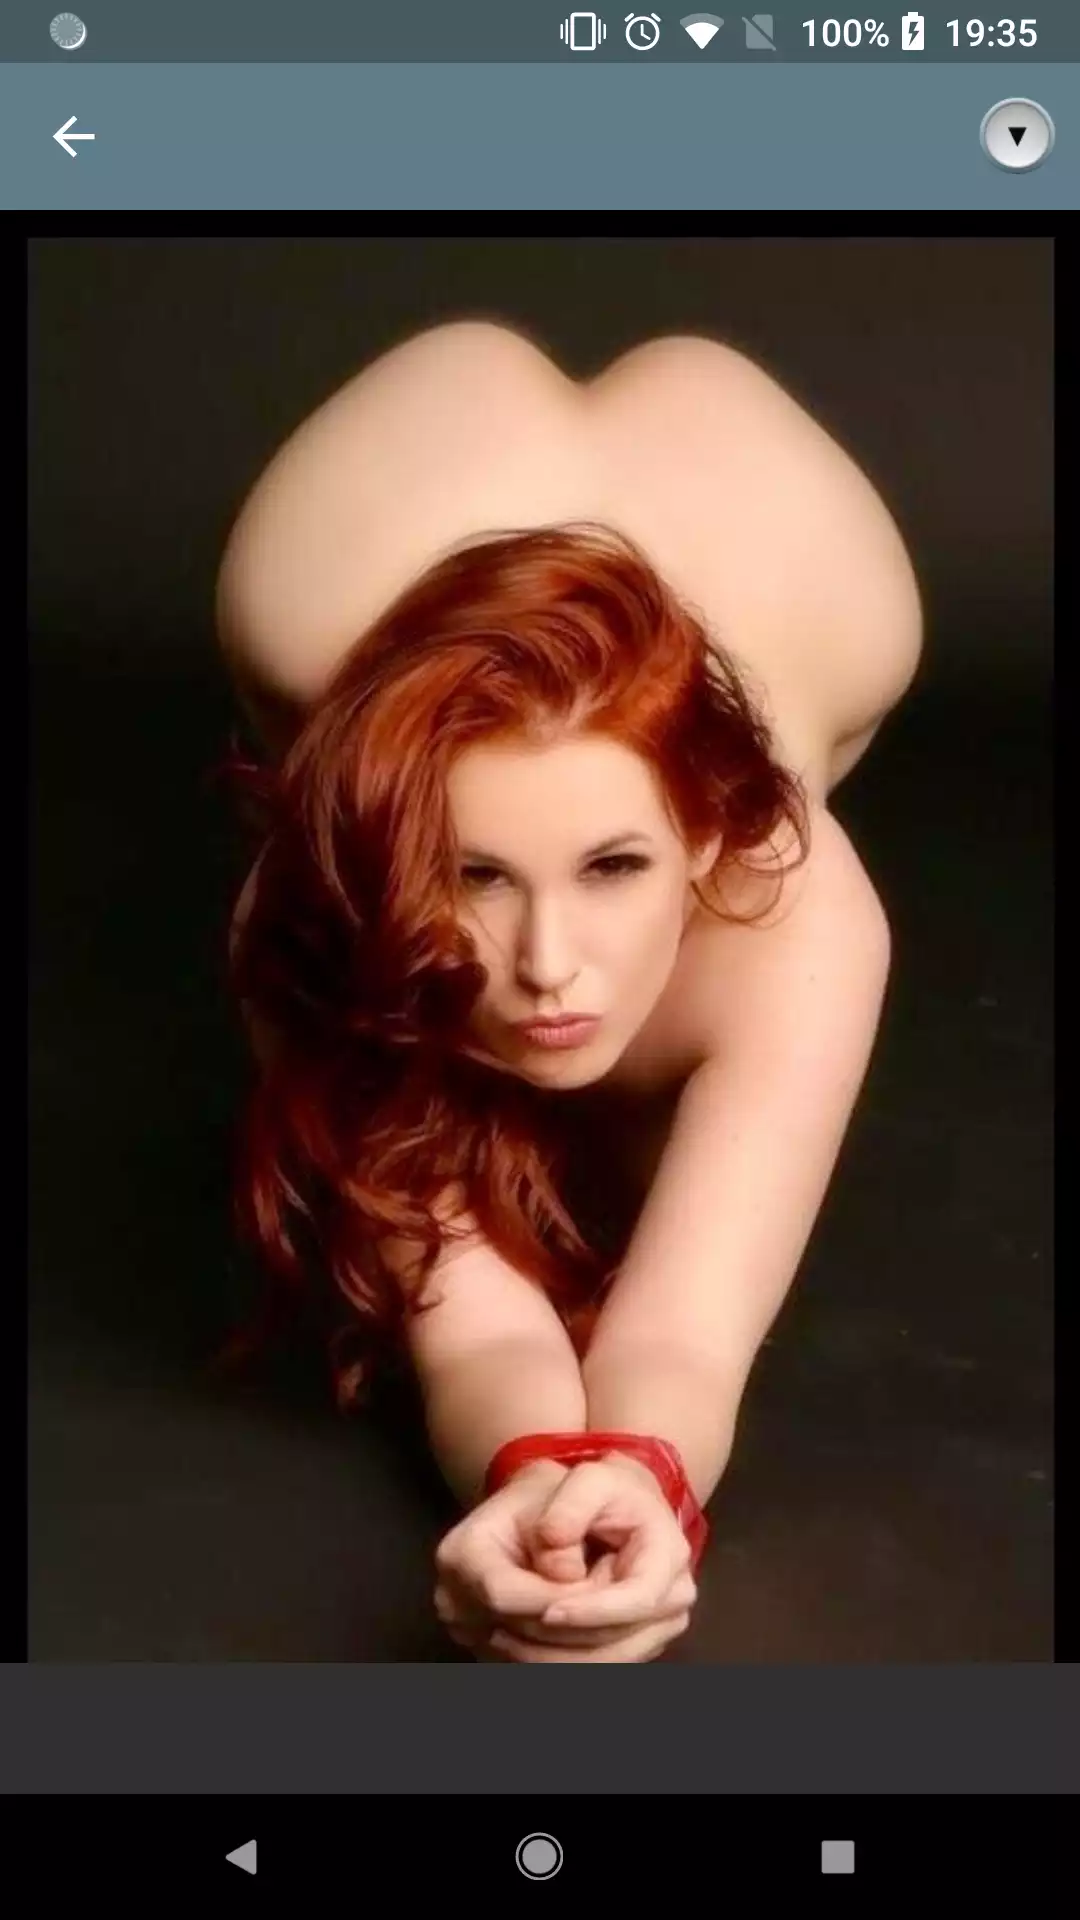 Sexy Redhead pics hot,download,apks,app,pice,redhead,hentia,sexy,porn,amateurs,picture,pornstar,collection,best,android,pictures,apk,apps,pic,pics,hentai,photos,hentaimanga